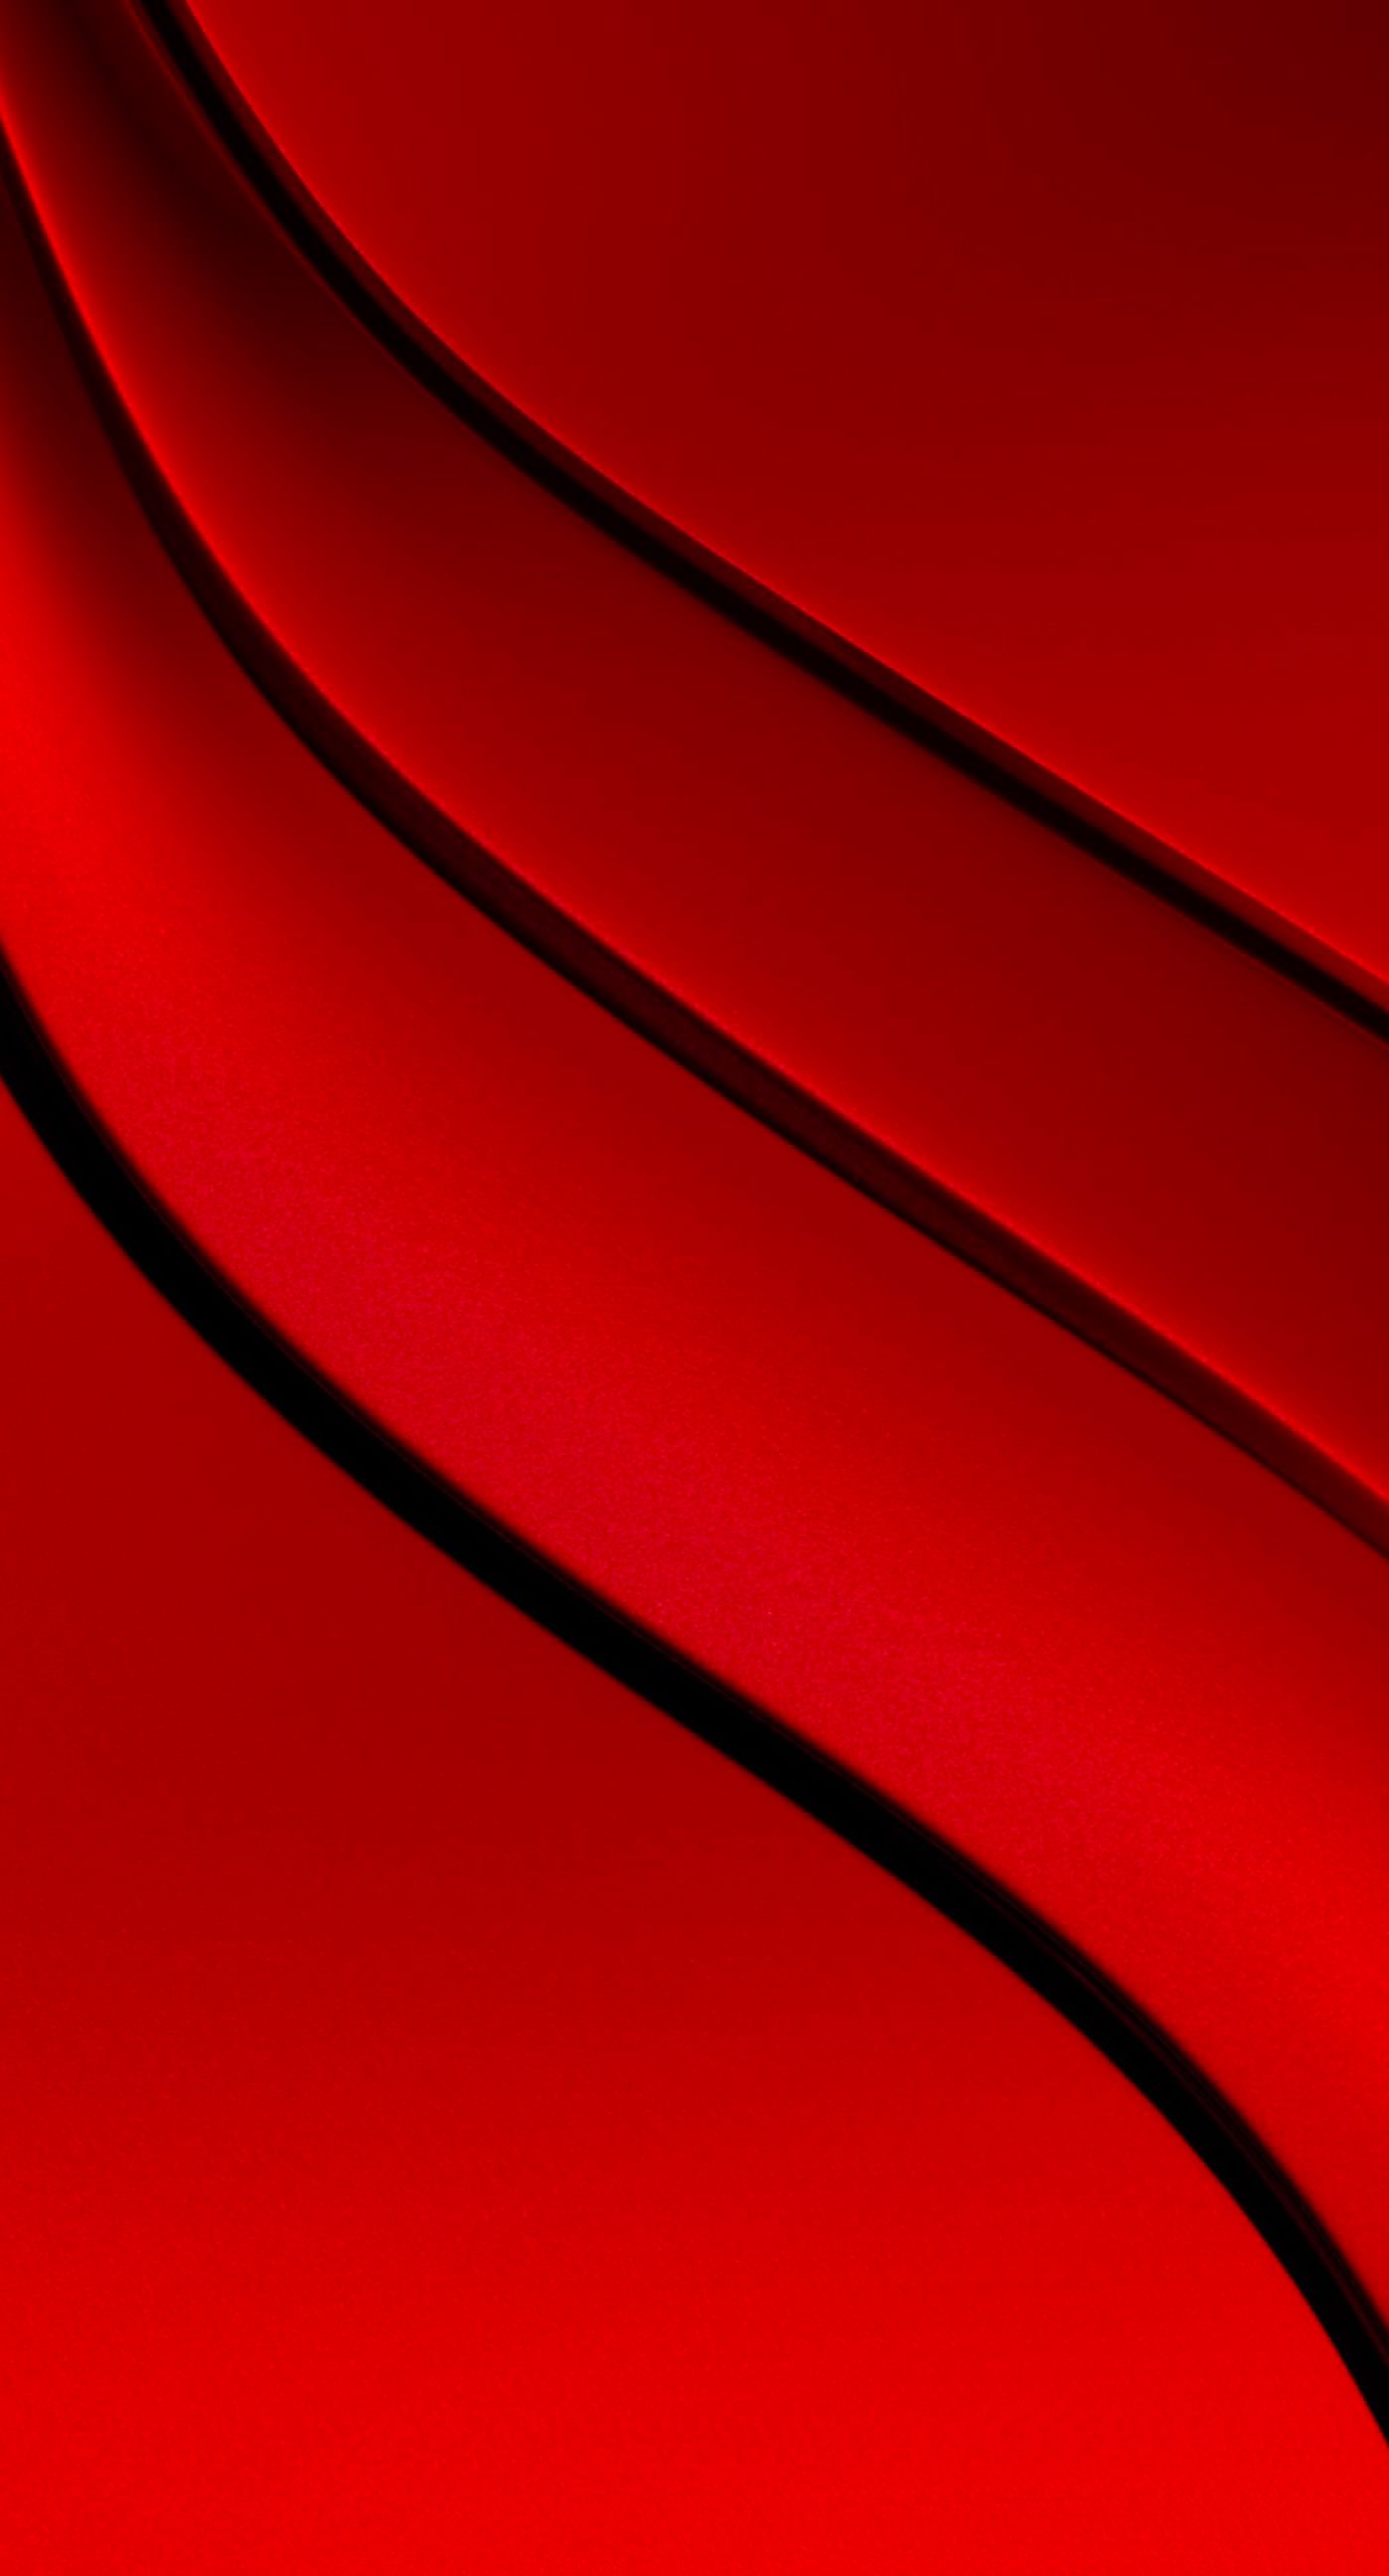 Red Cool Wallpaper Sc Iphone7plus